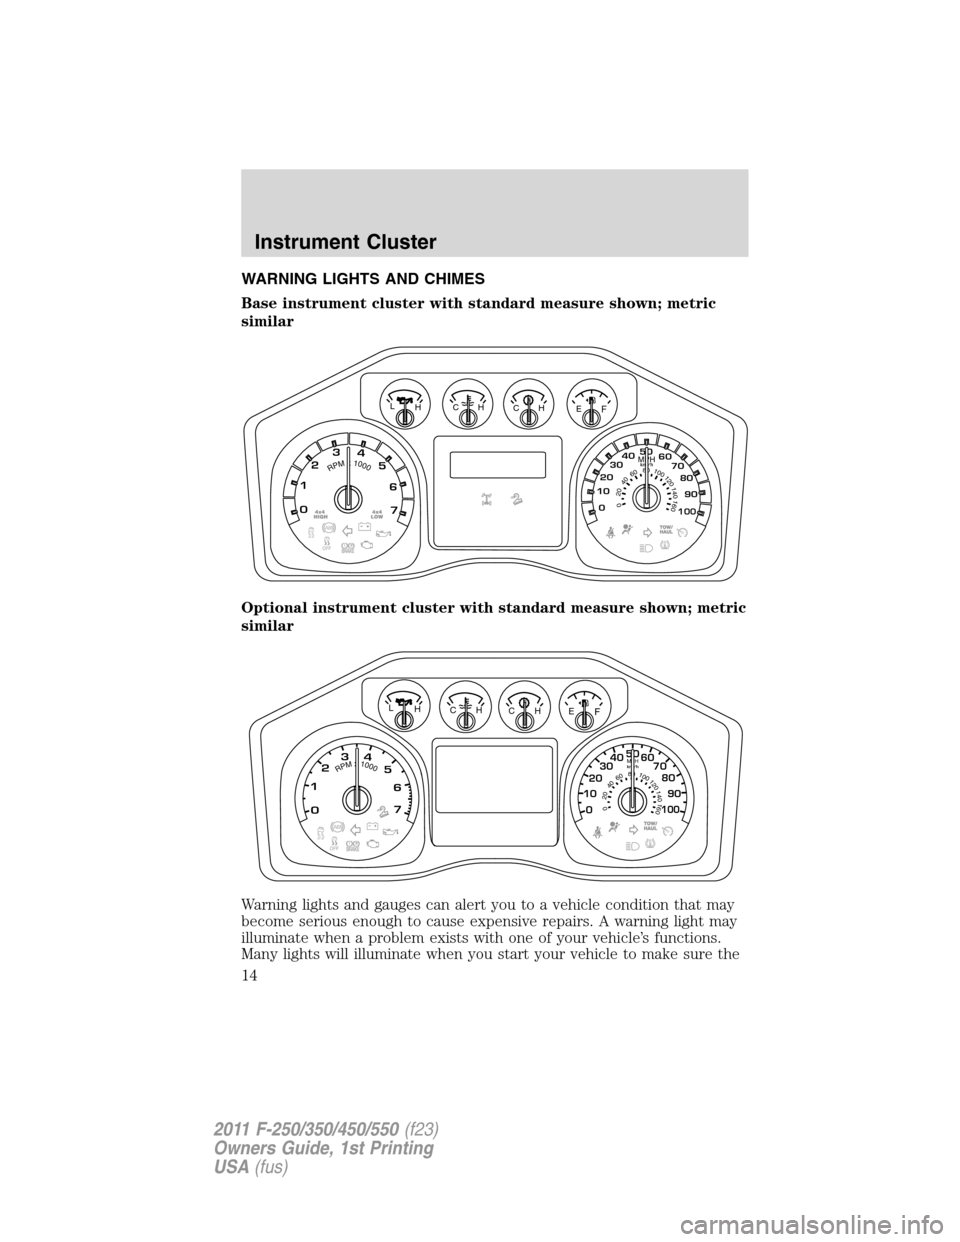 FORD SUPER DUTY 2011 3.G Owners Manual WARNING LIGHTS AND CHIMES
Base instrument cluster with standard measure shown; metric
similar
Optional instrument cluster with standard measure shown; metric
similar
Warning lights and gauges can aler